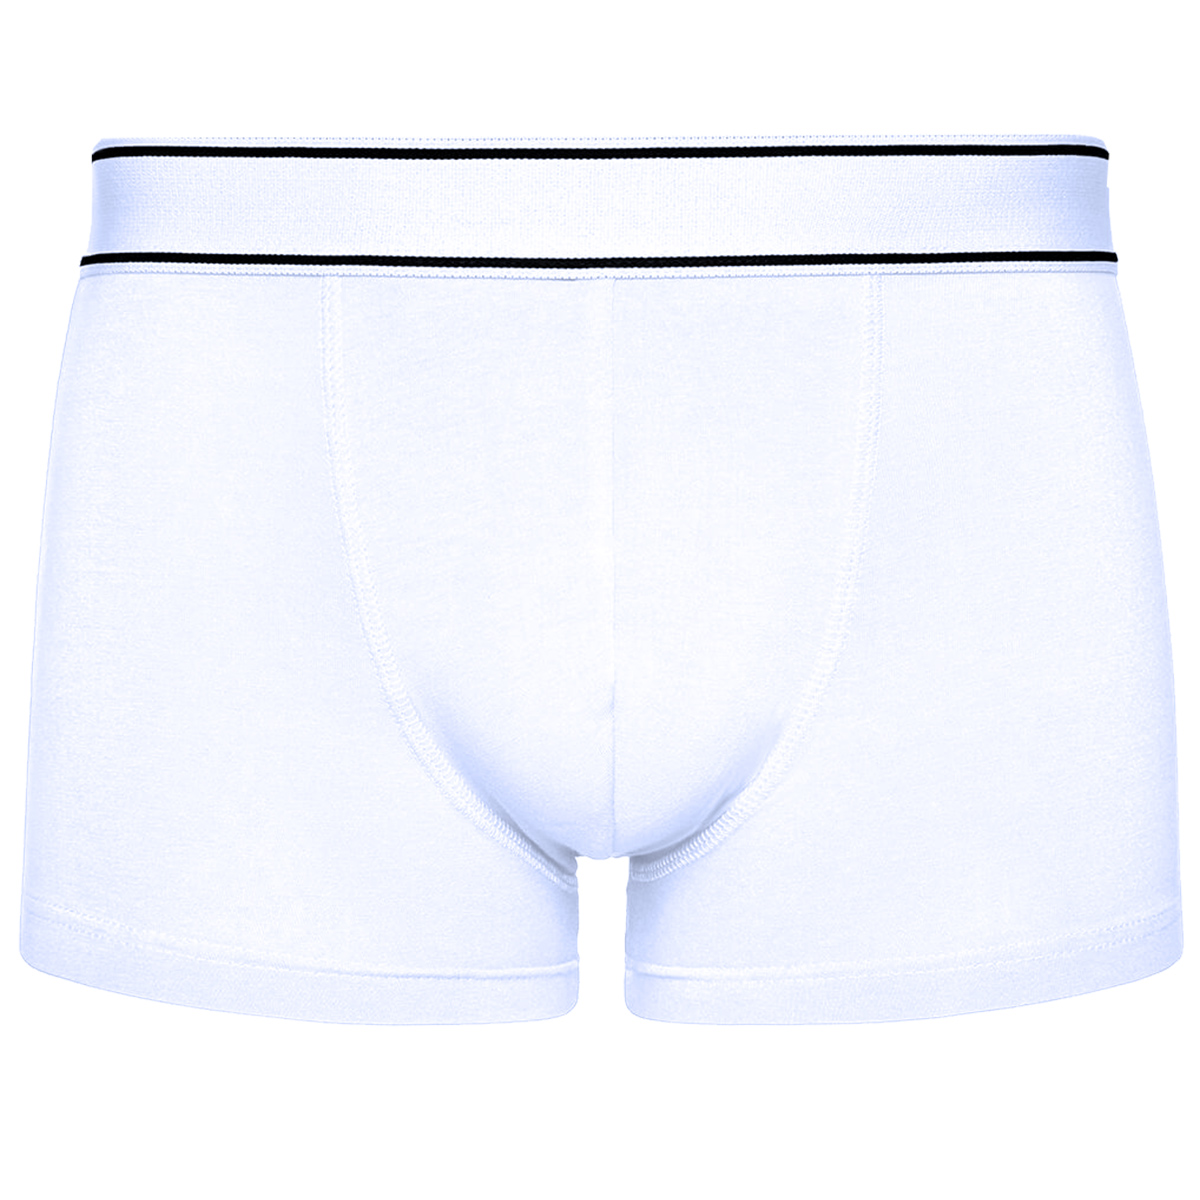 BOXERSHORTS - WOOF - WEISS